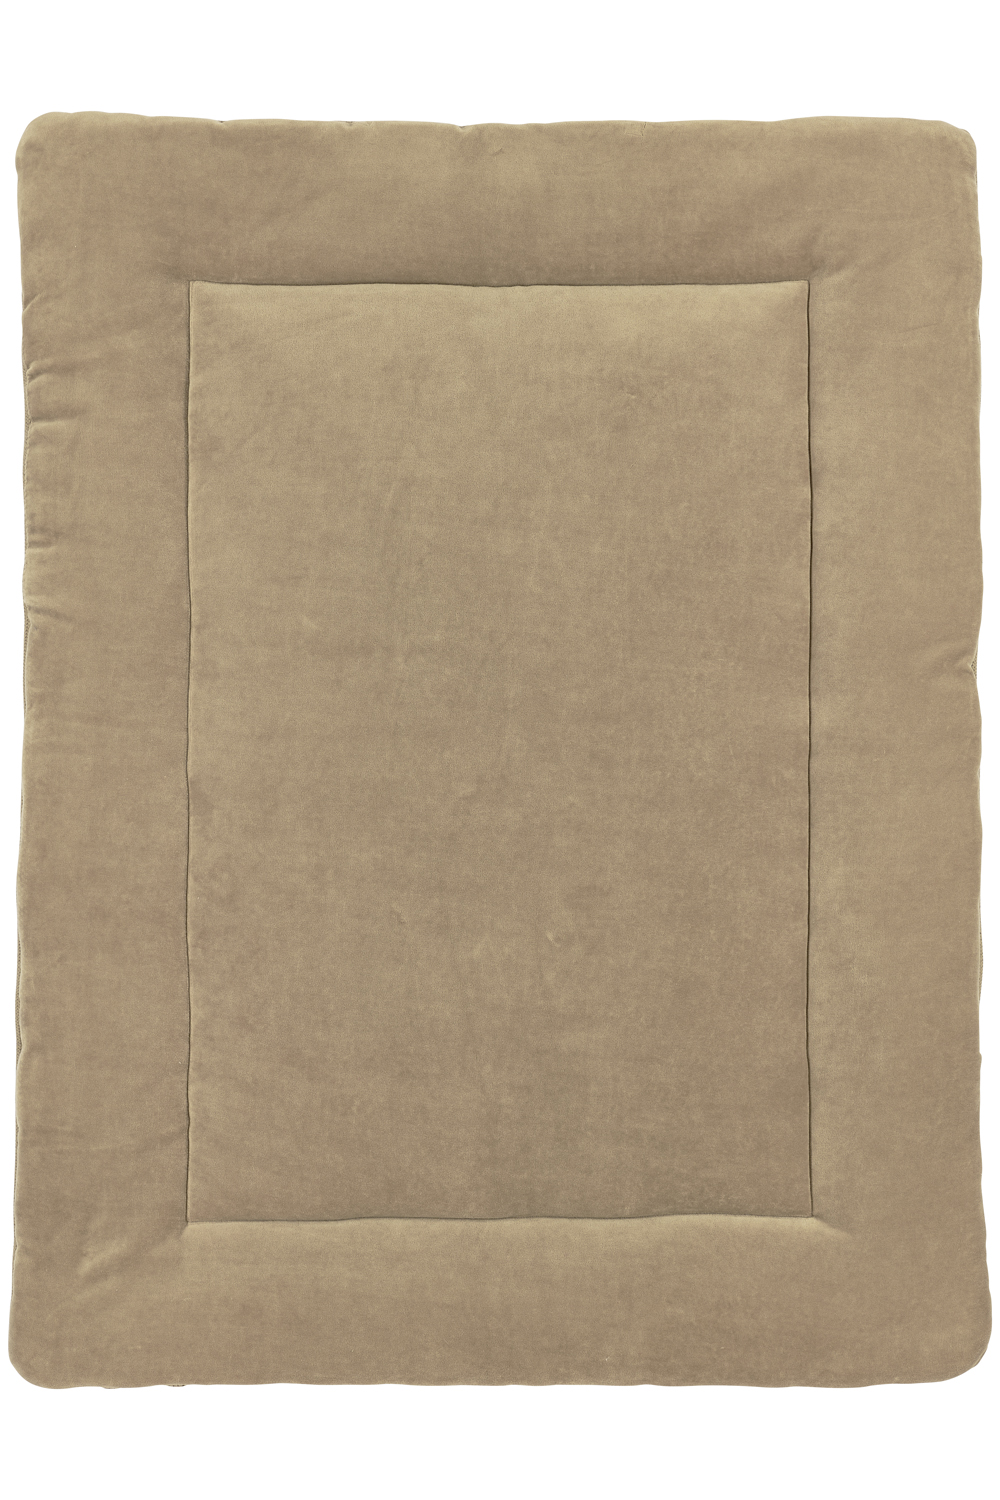 Boxkleed Knots - Taupe - 77x97cm